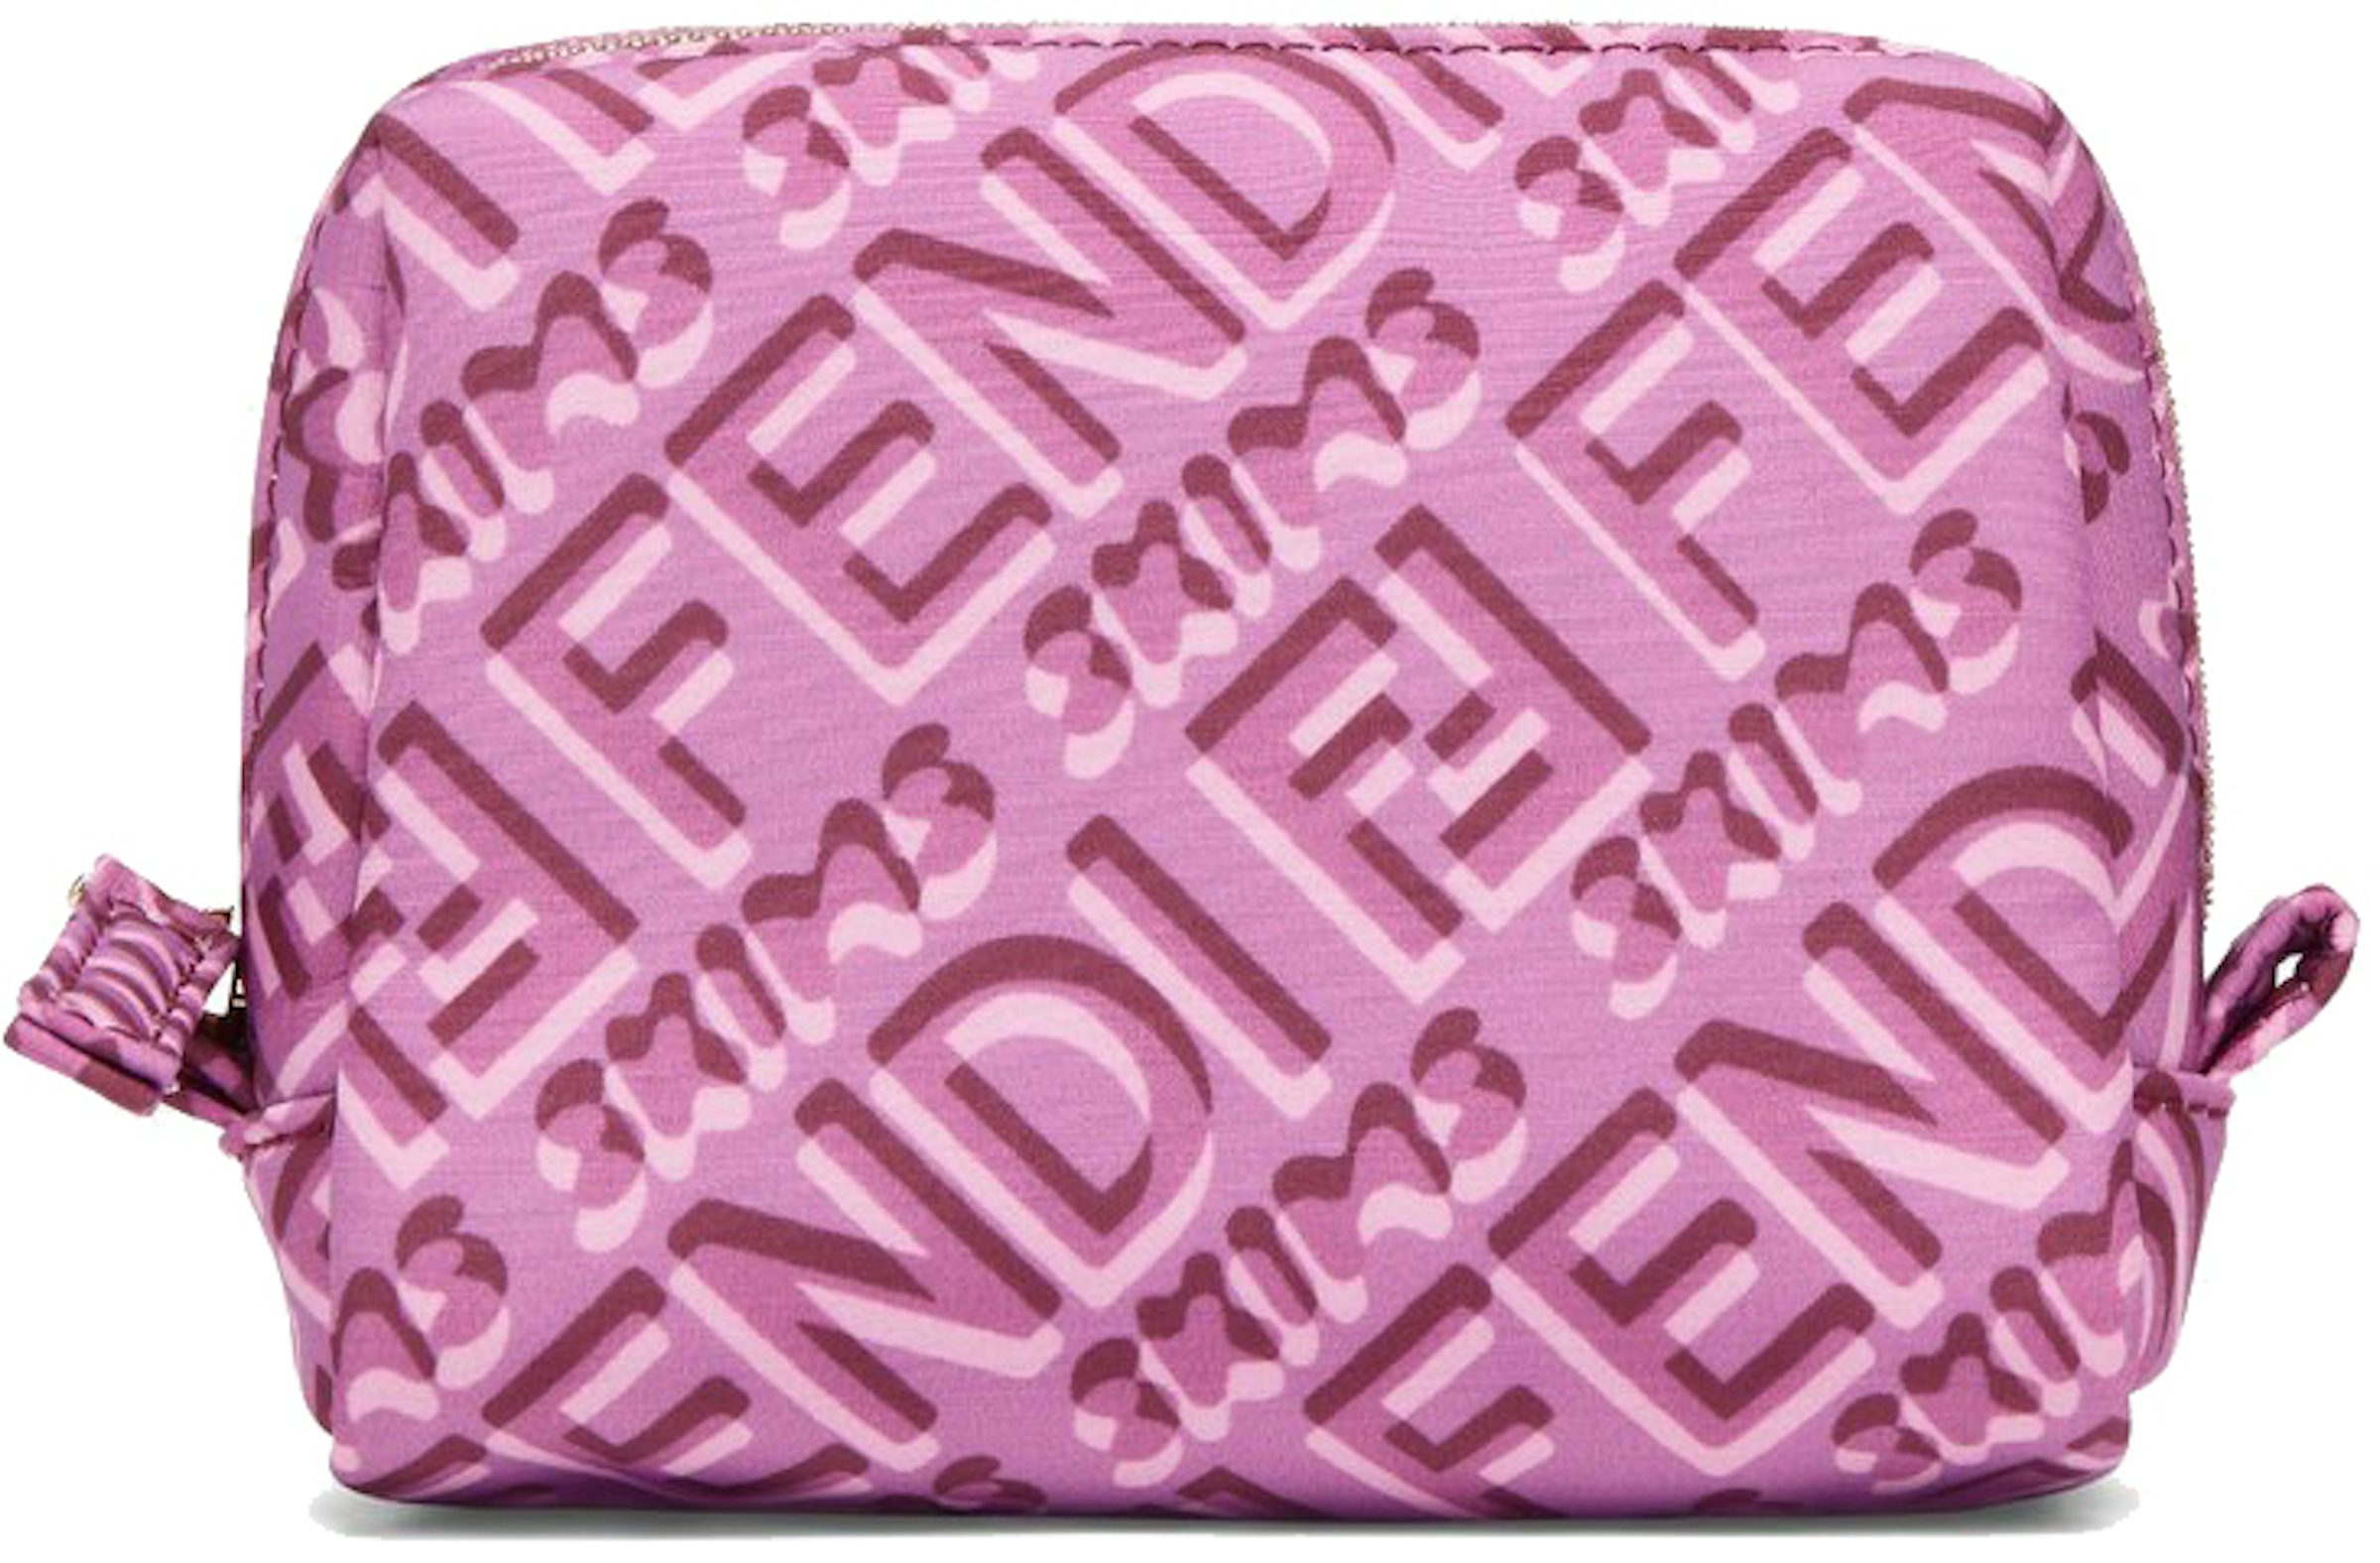 Mini Leather Pouch in Pink - Fendi